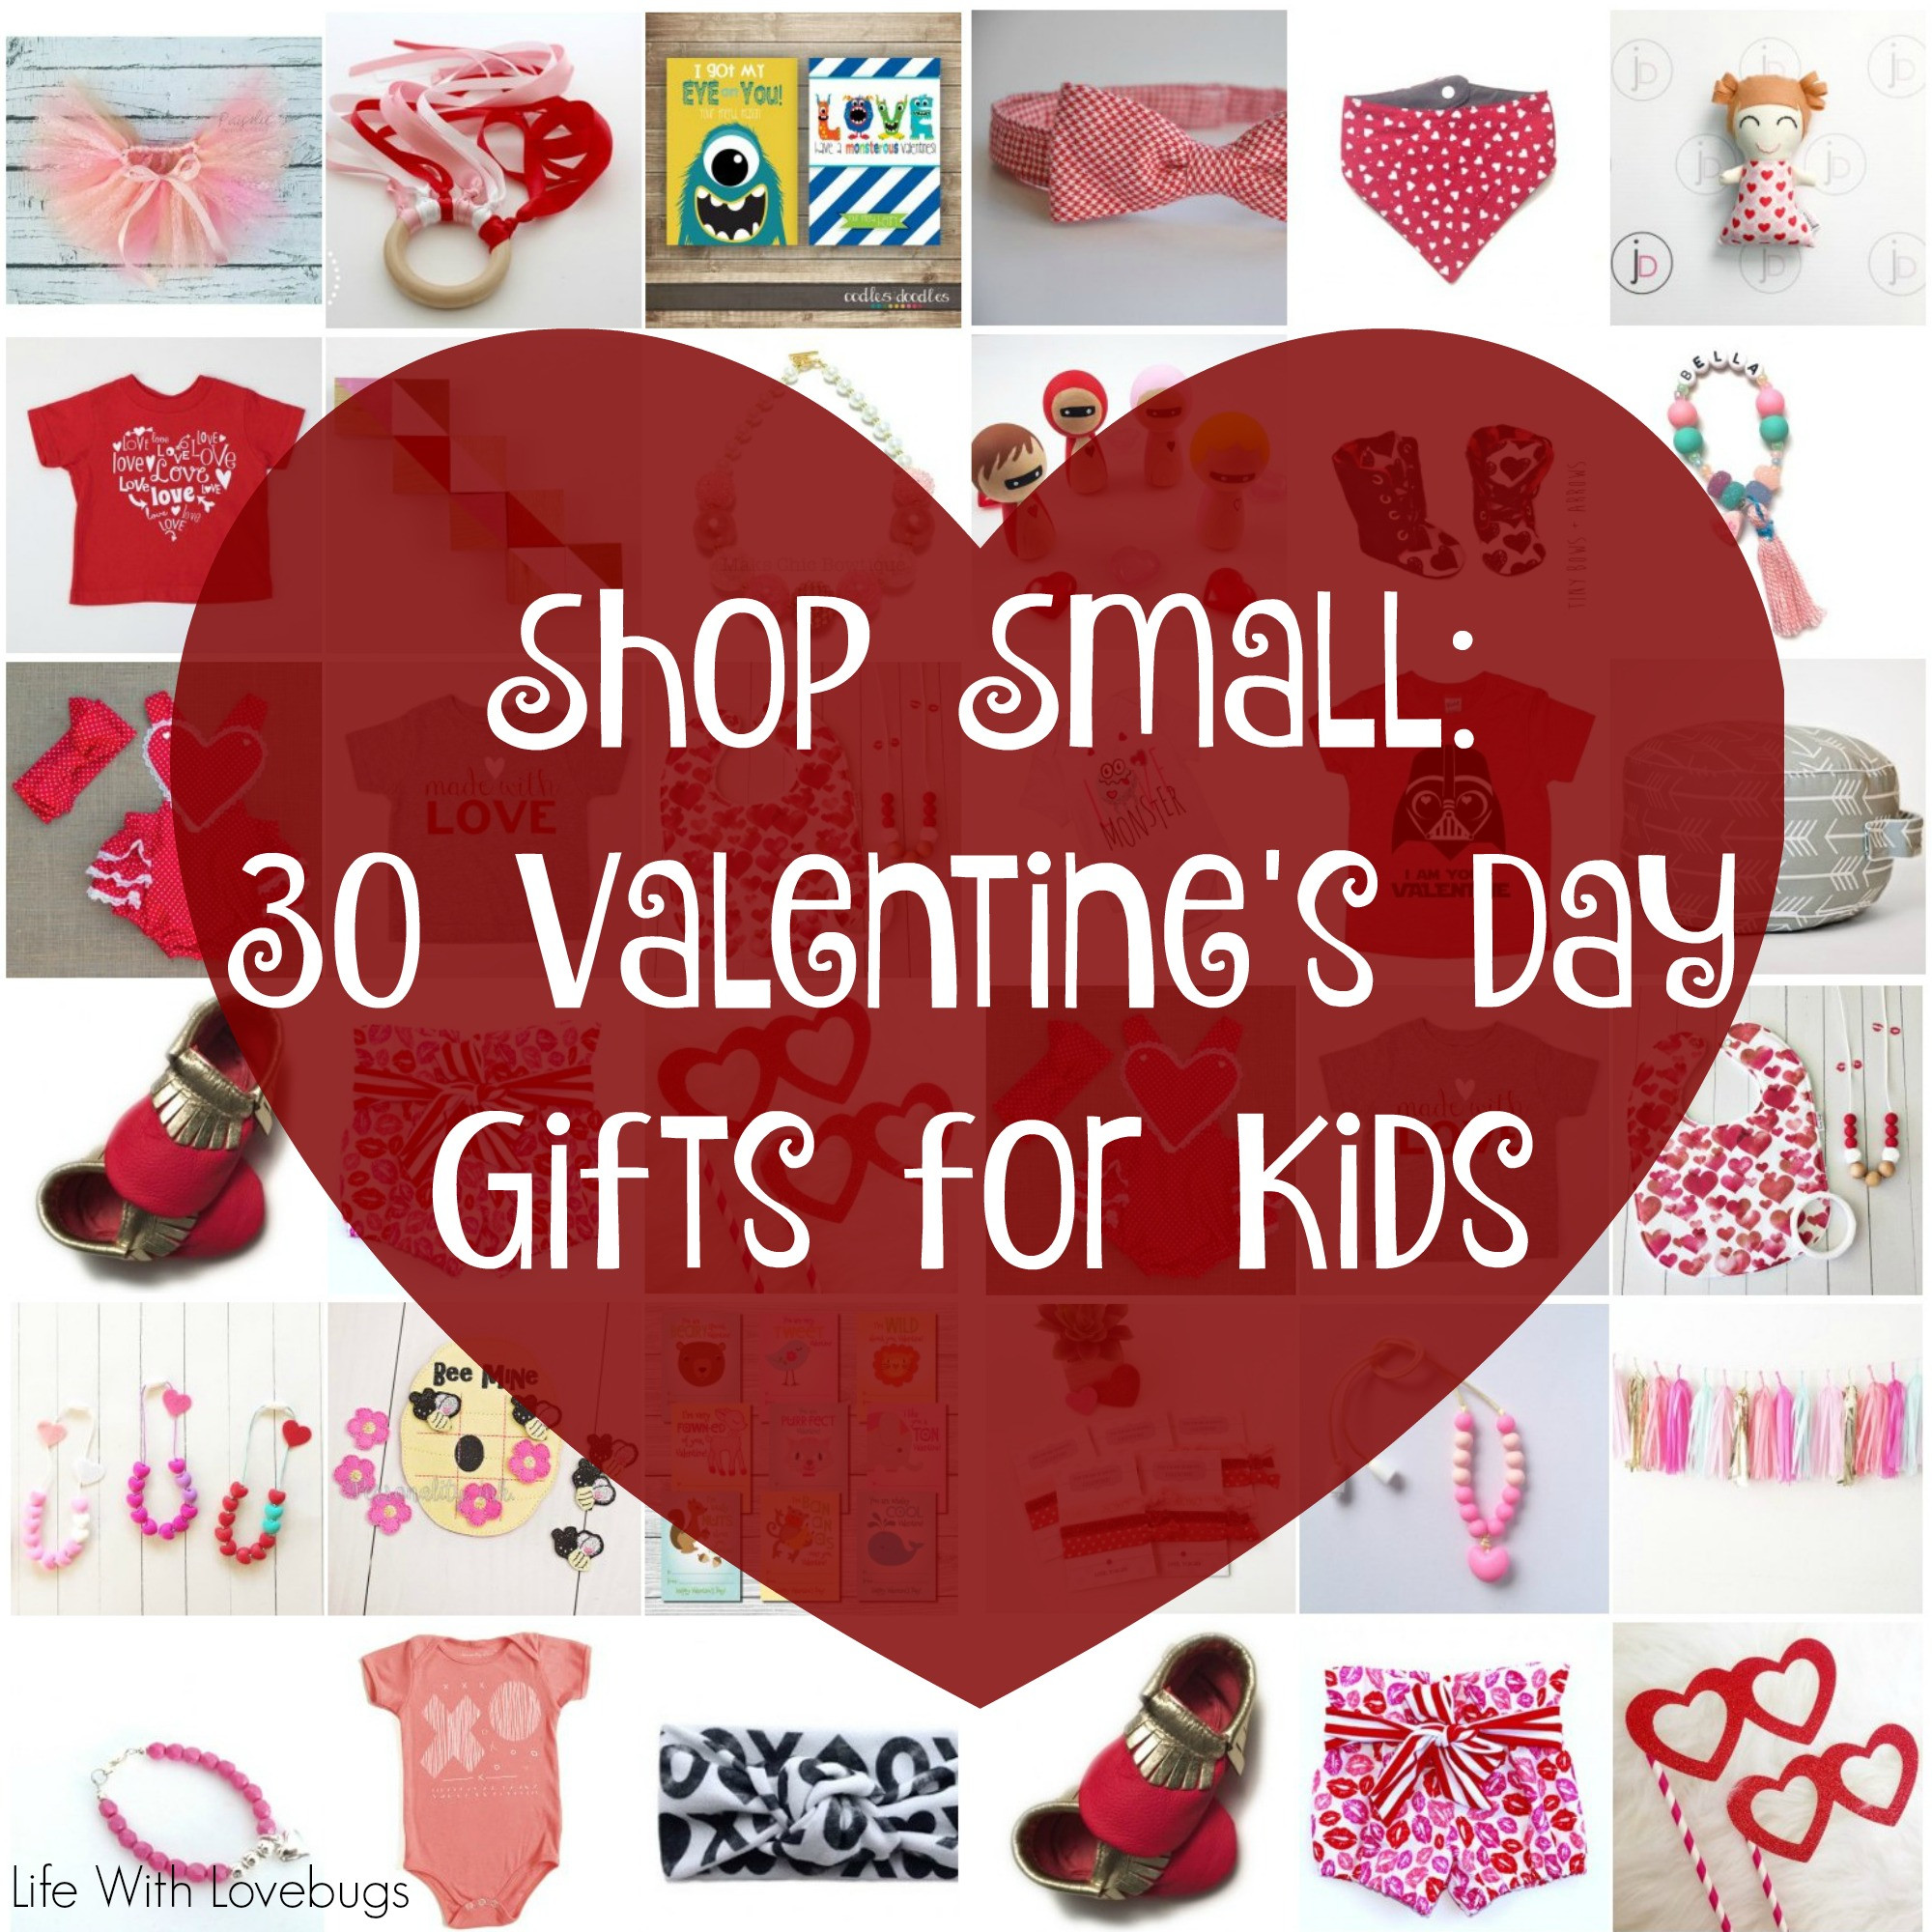 Small Valentines Gift Ideas
 Shop Small 30 Valentines Day Gifts for Kids Life With